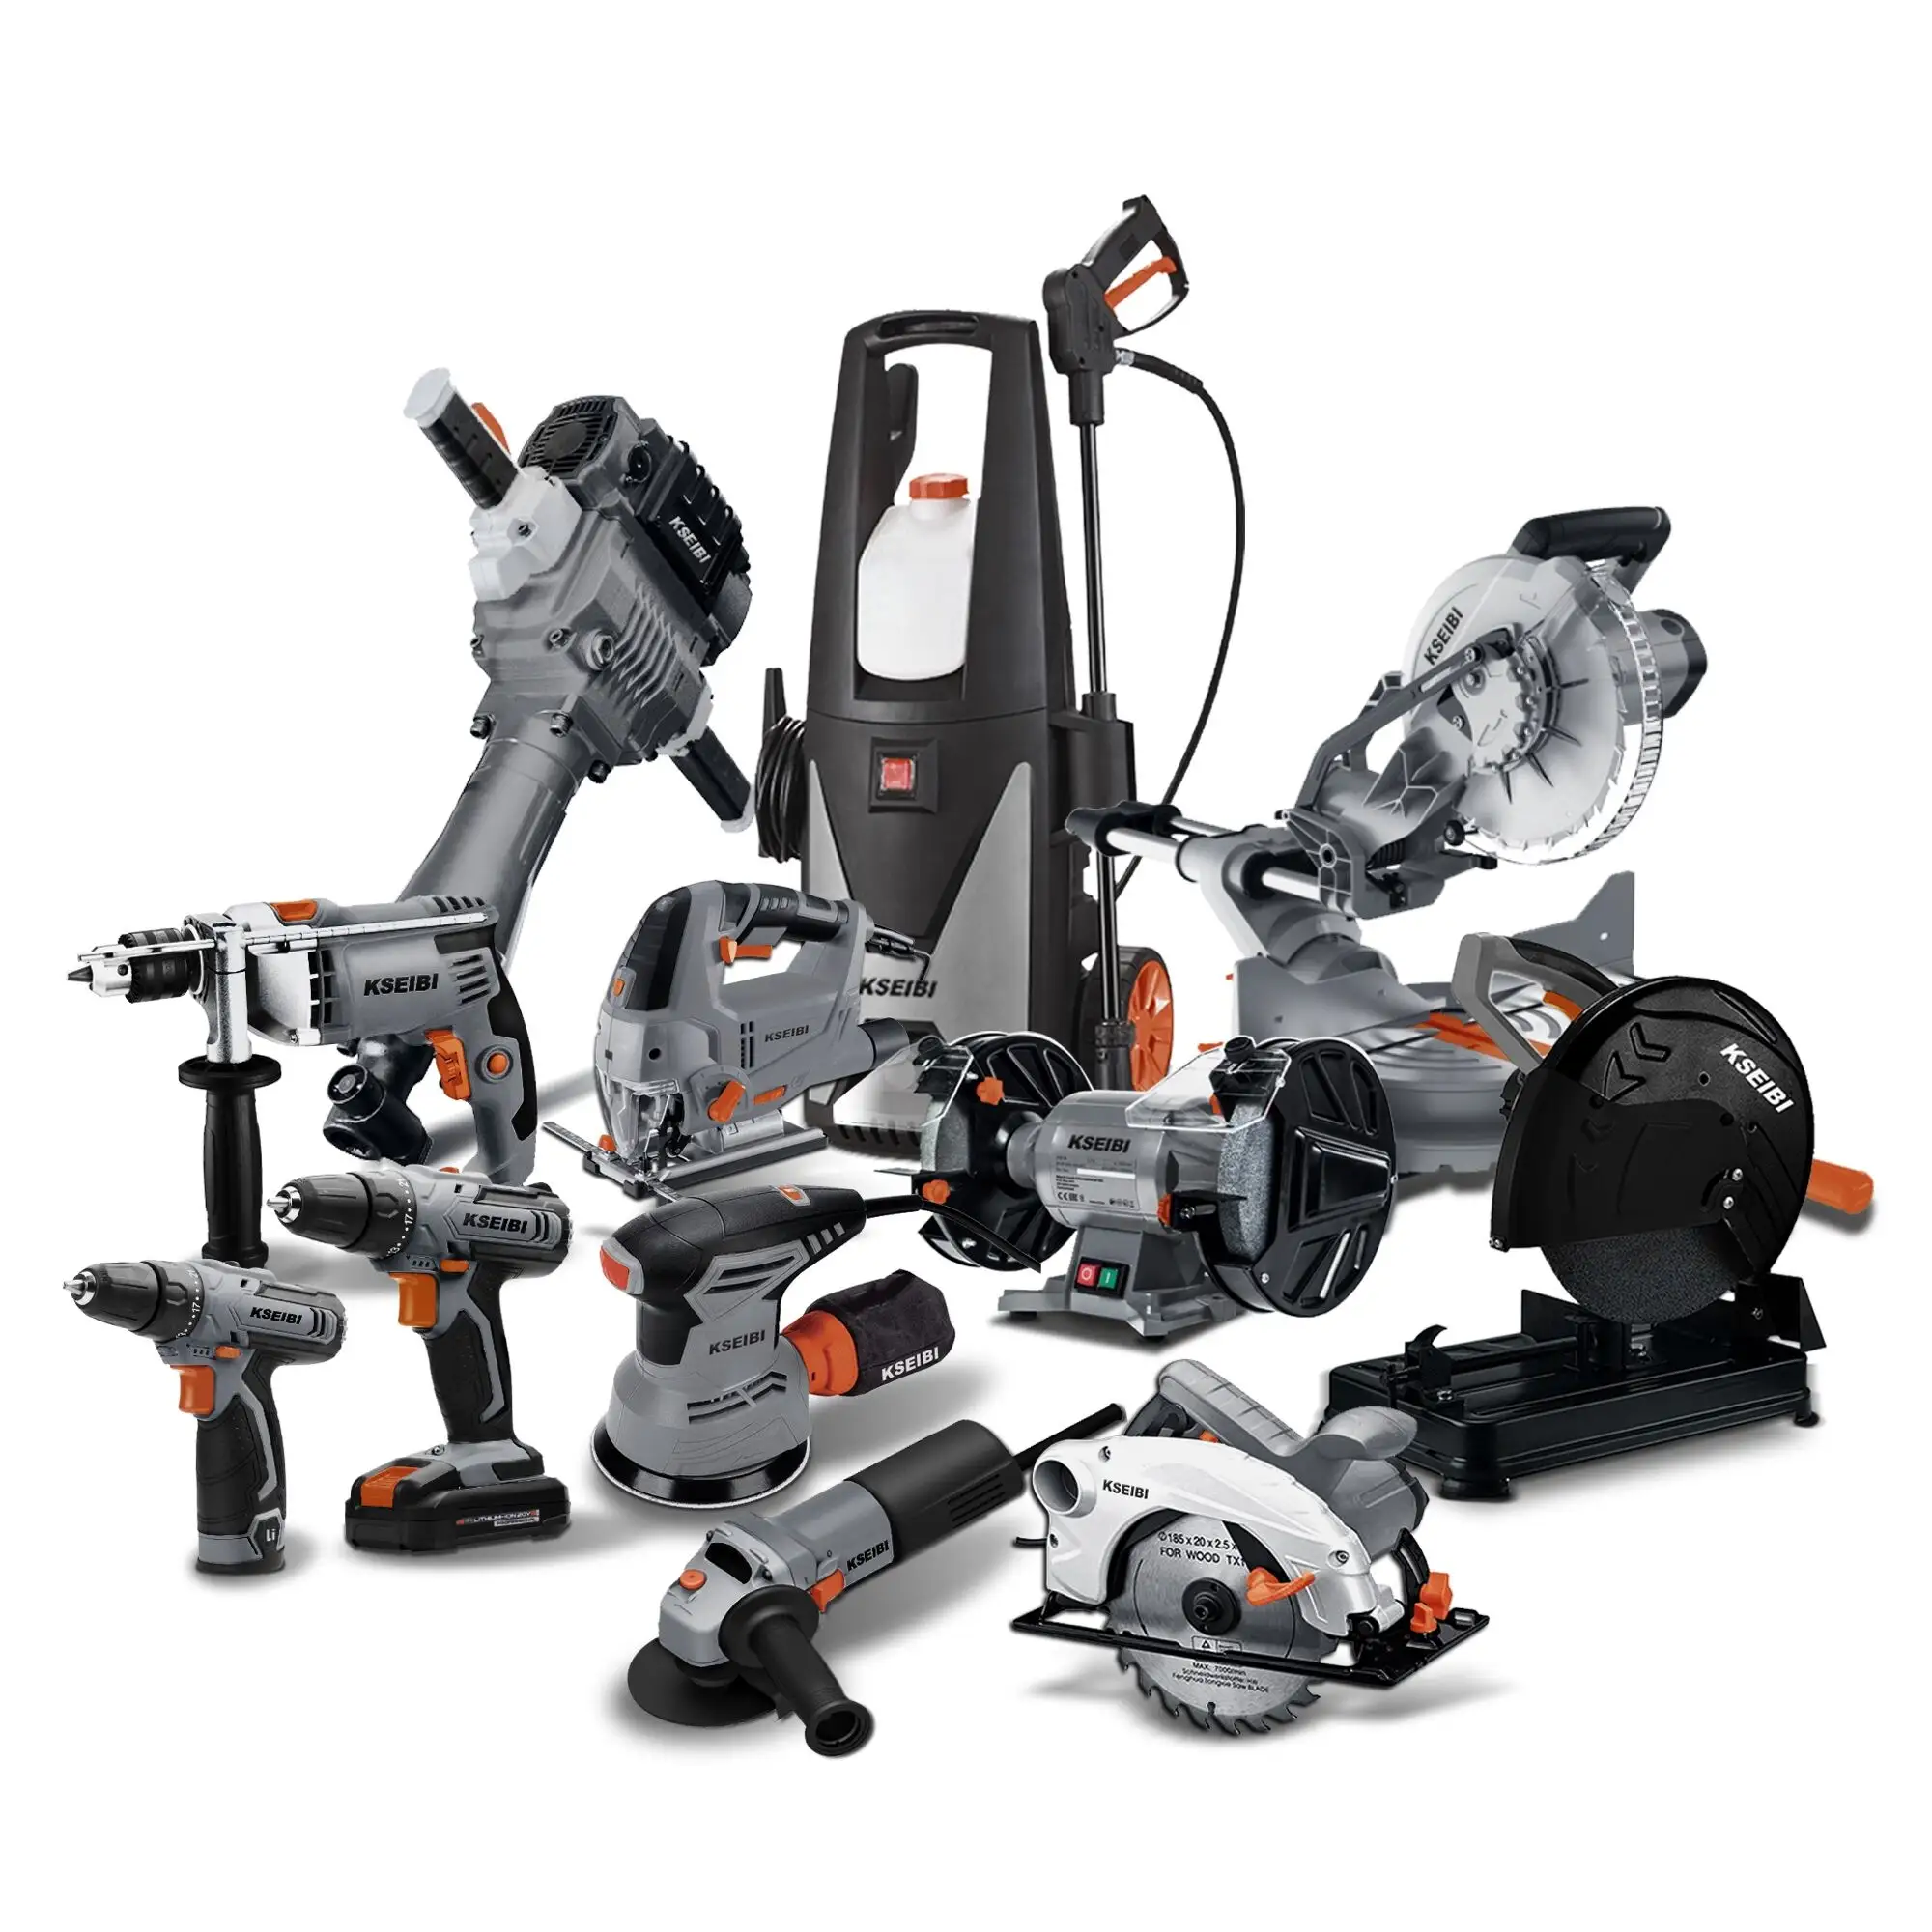 KSEIBI Ready To Ship Full Range Electric Corded And Cordless Power Tools